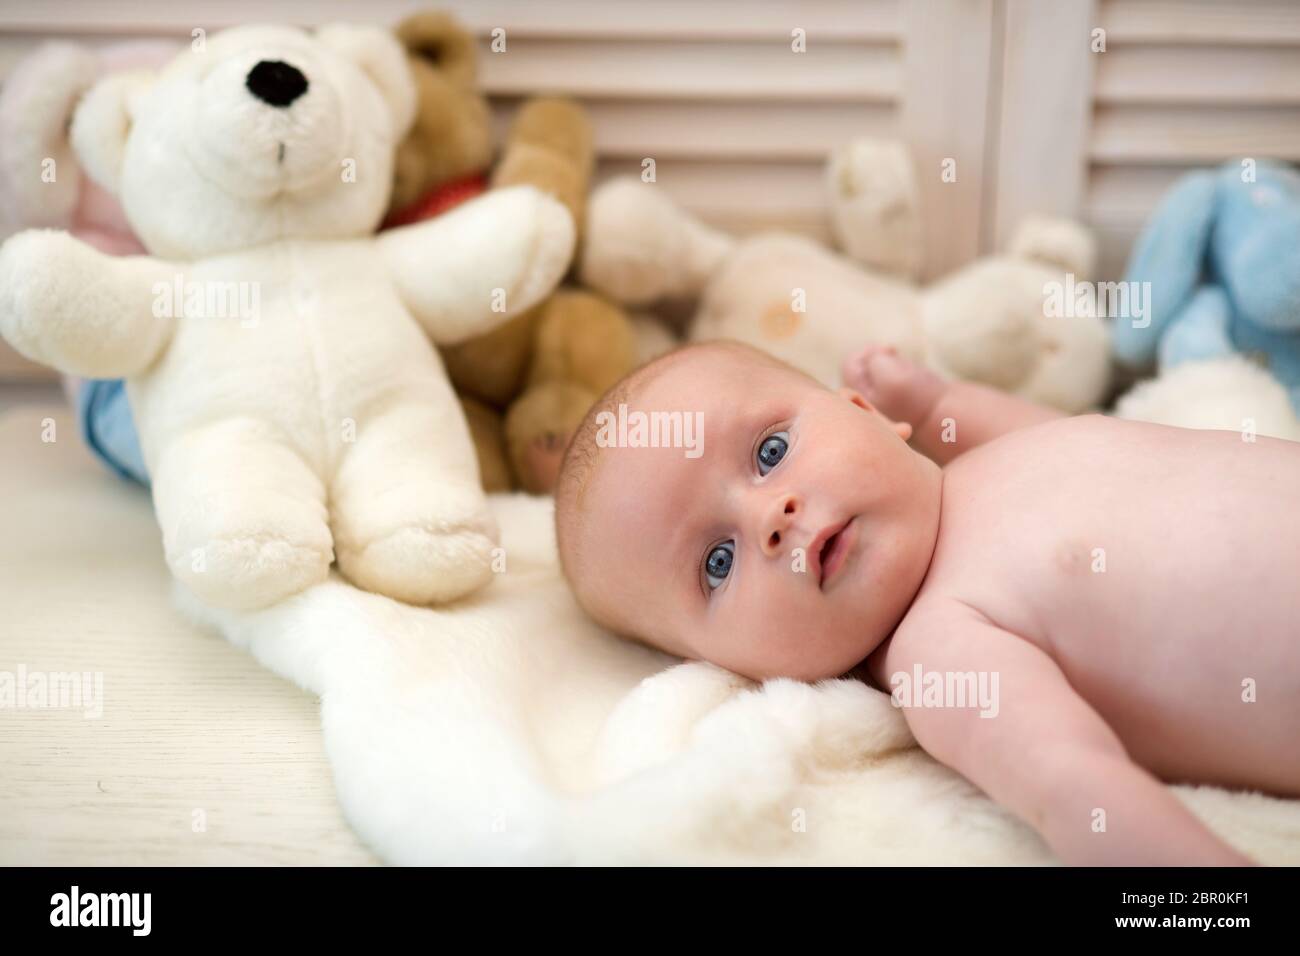 Infant with blue eyes and surprised face on light blanket with ...